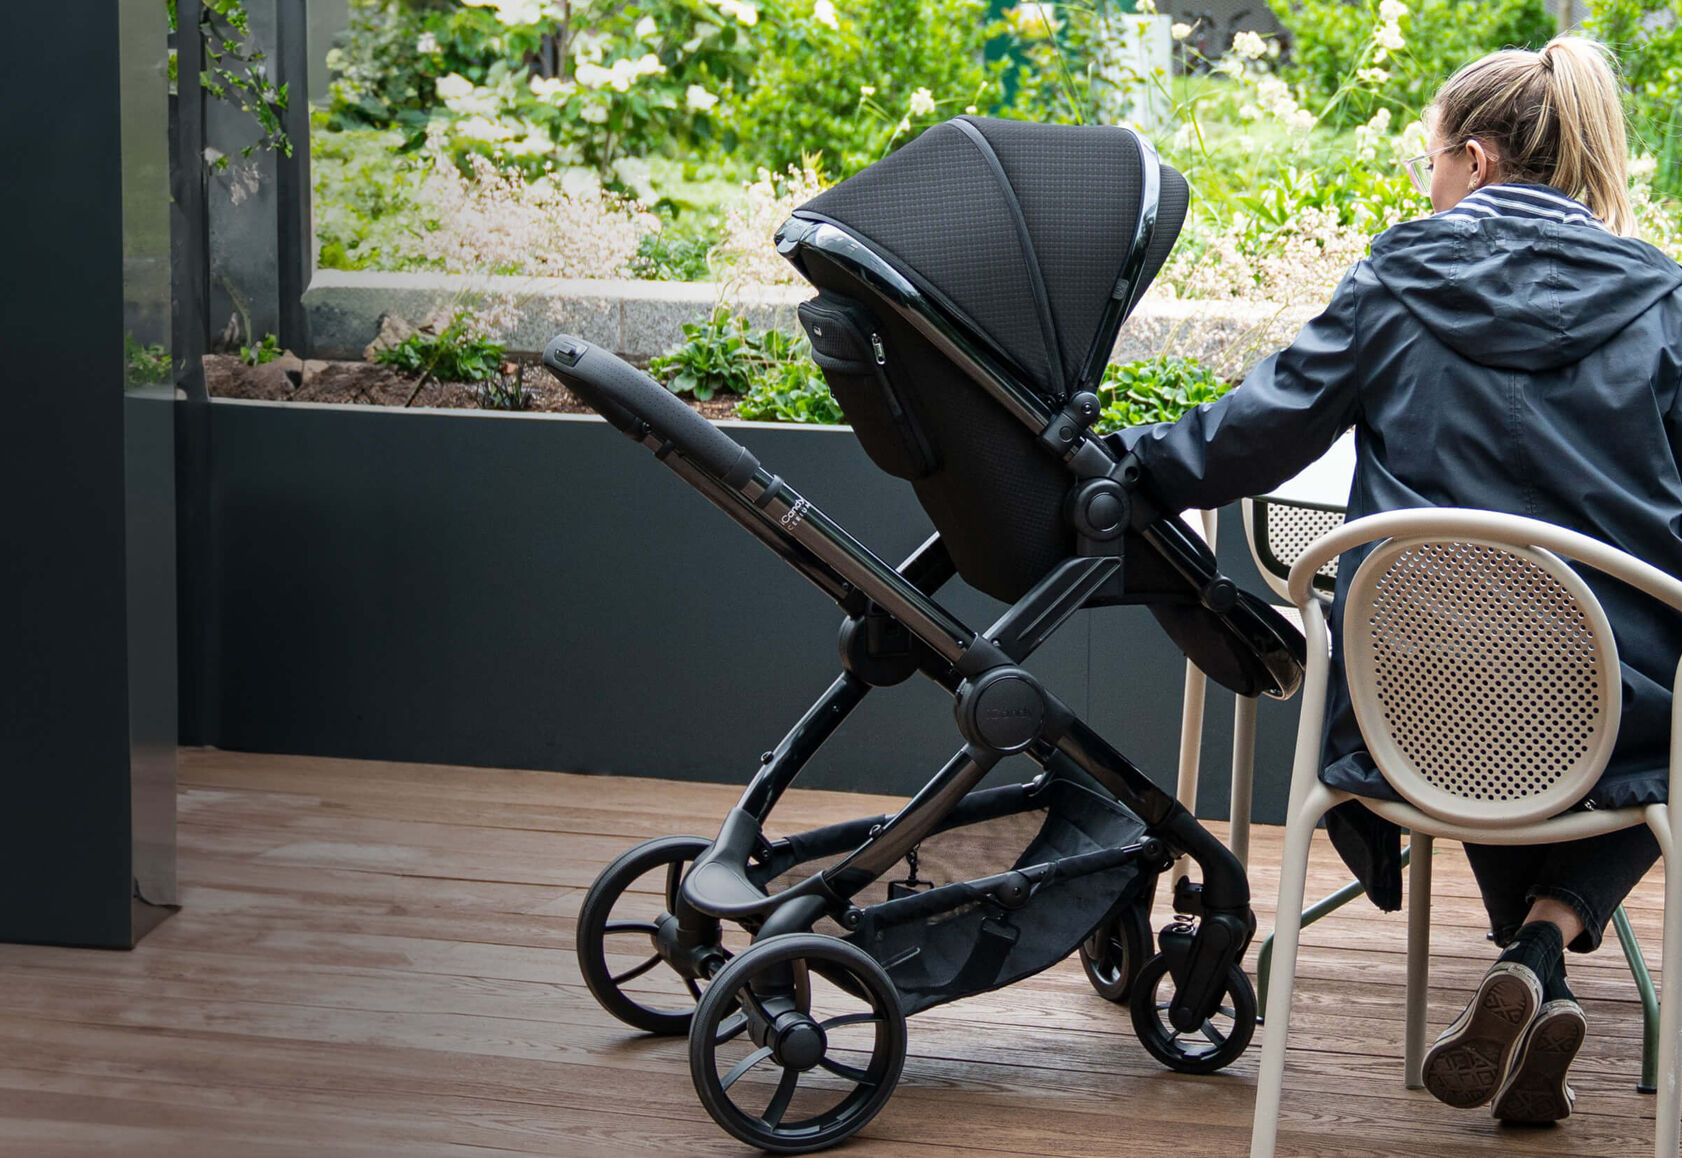 Buying a pushchair: What you need to know